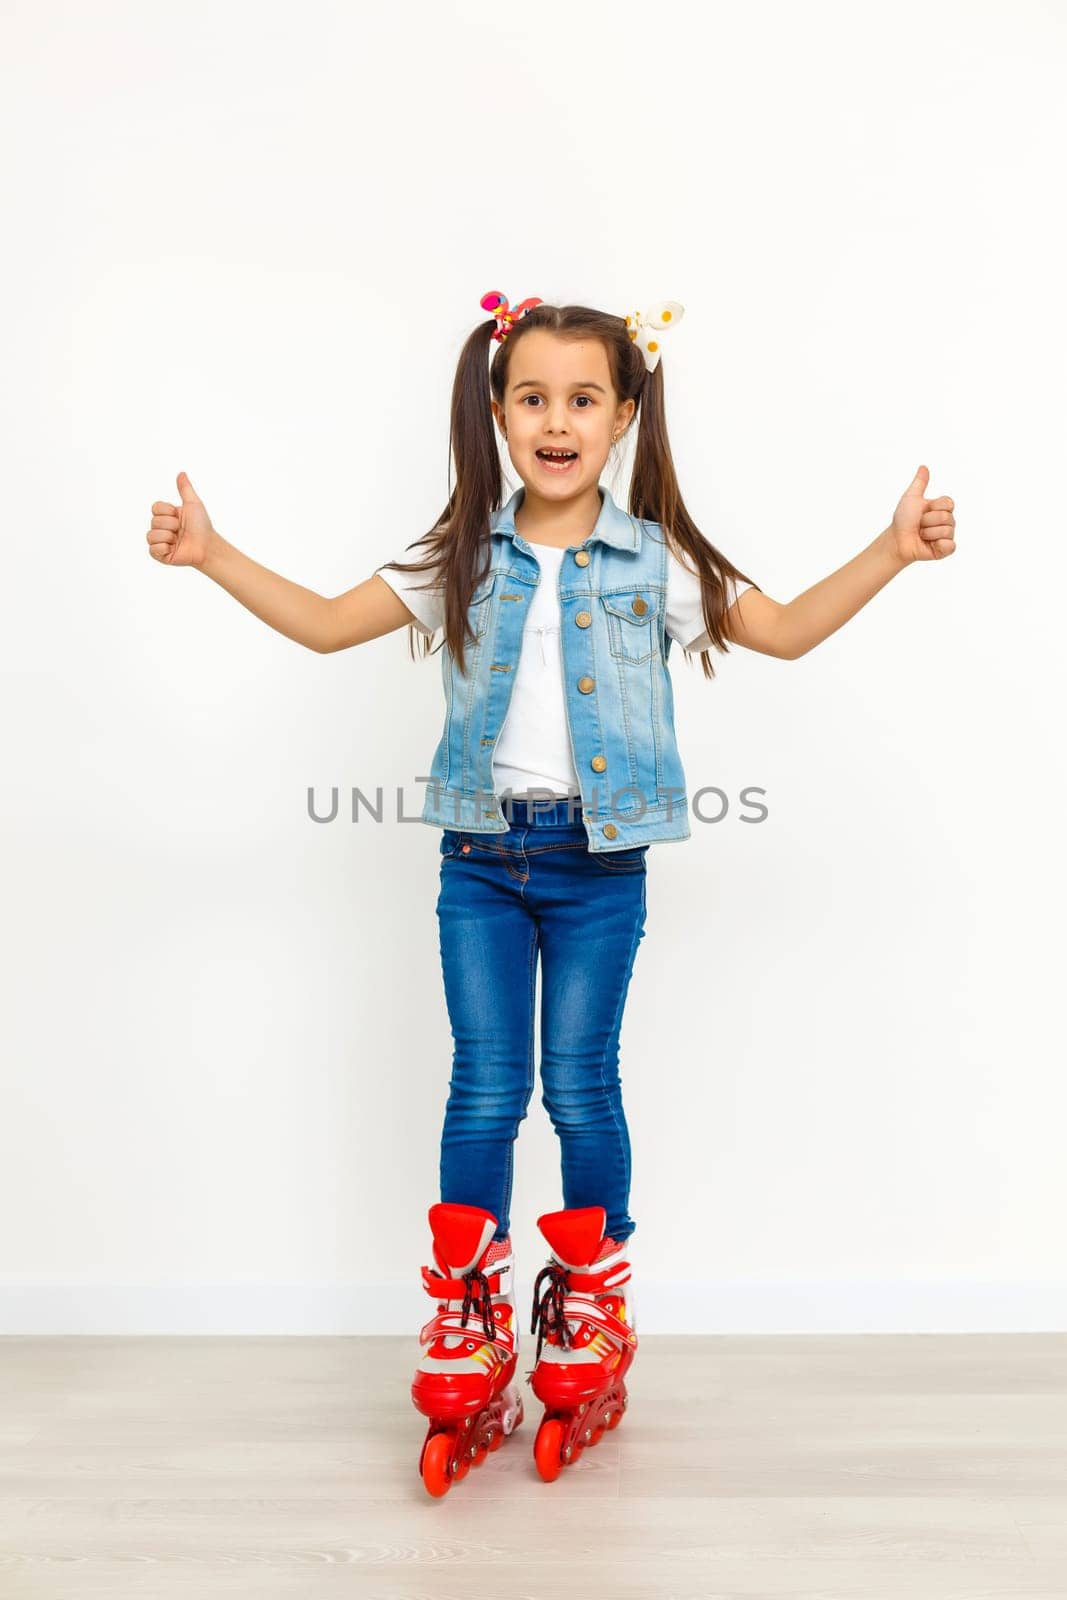 Cute girl in roller skates on a white background